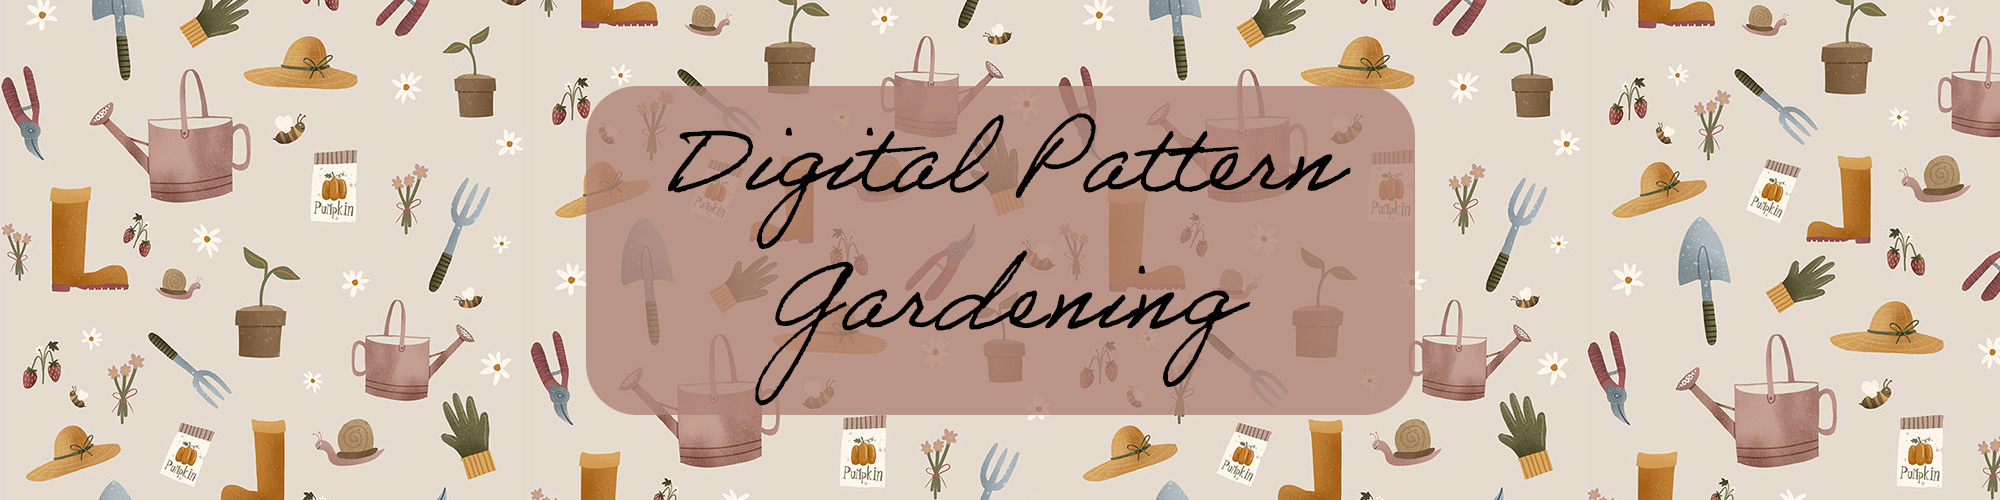 Create a natural oasis with this digital pattern: Perfect for gardeners and creative minds!